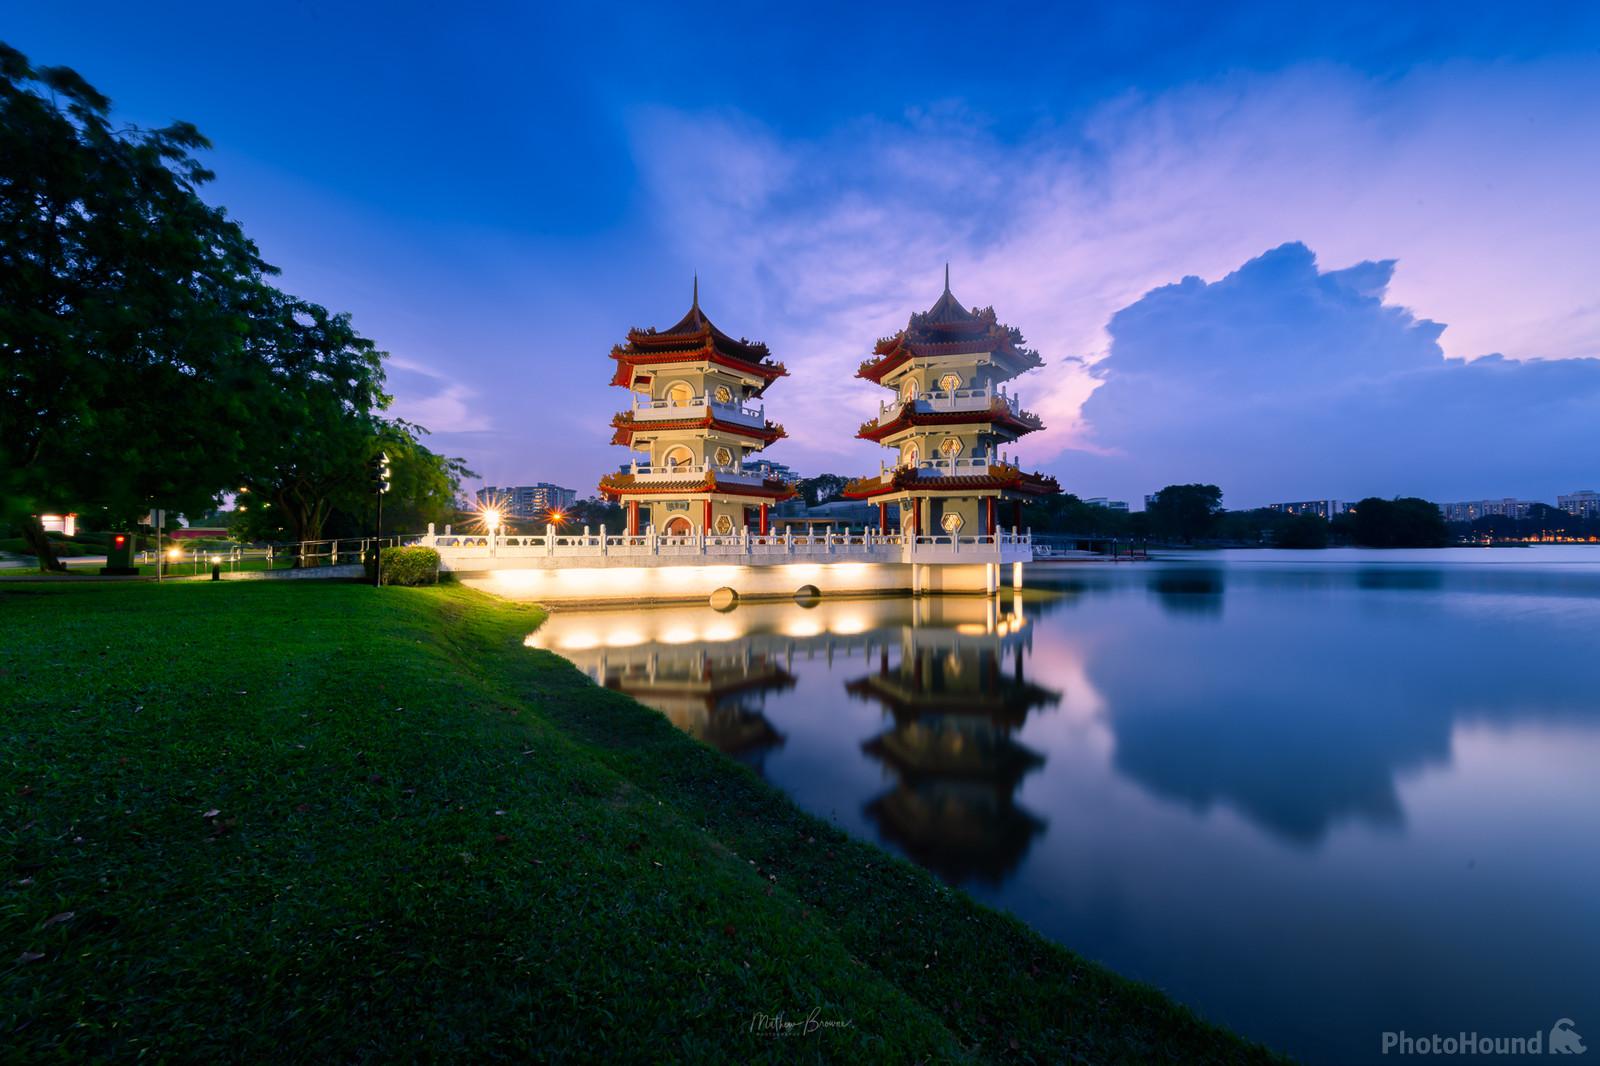 Image of Chinese Garden Twin Pagodas by Mathew Browne